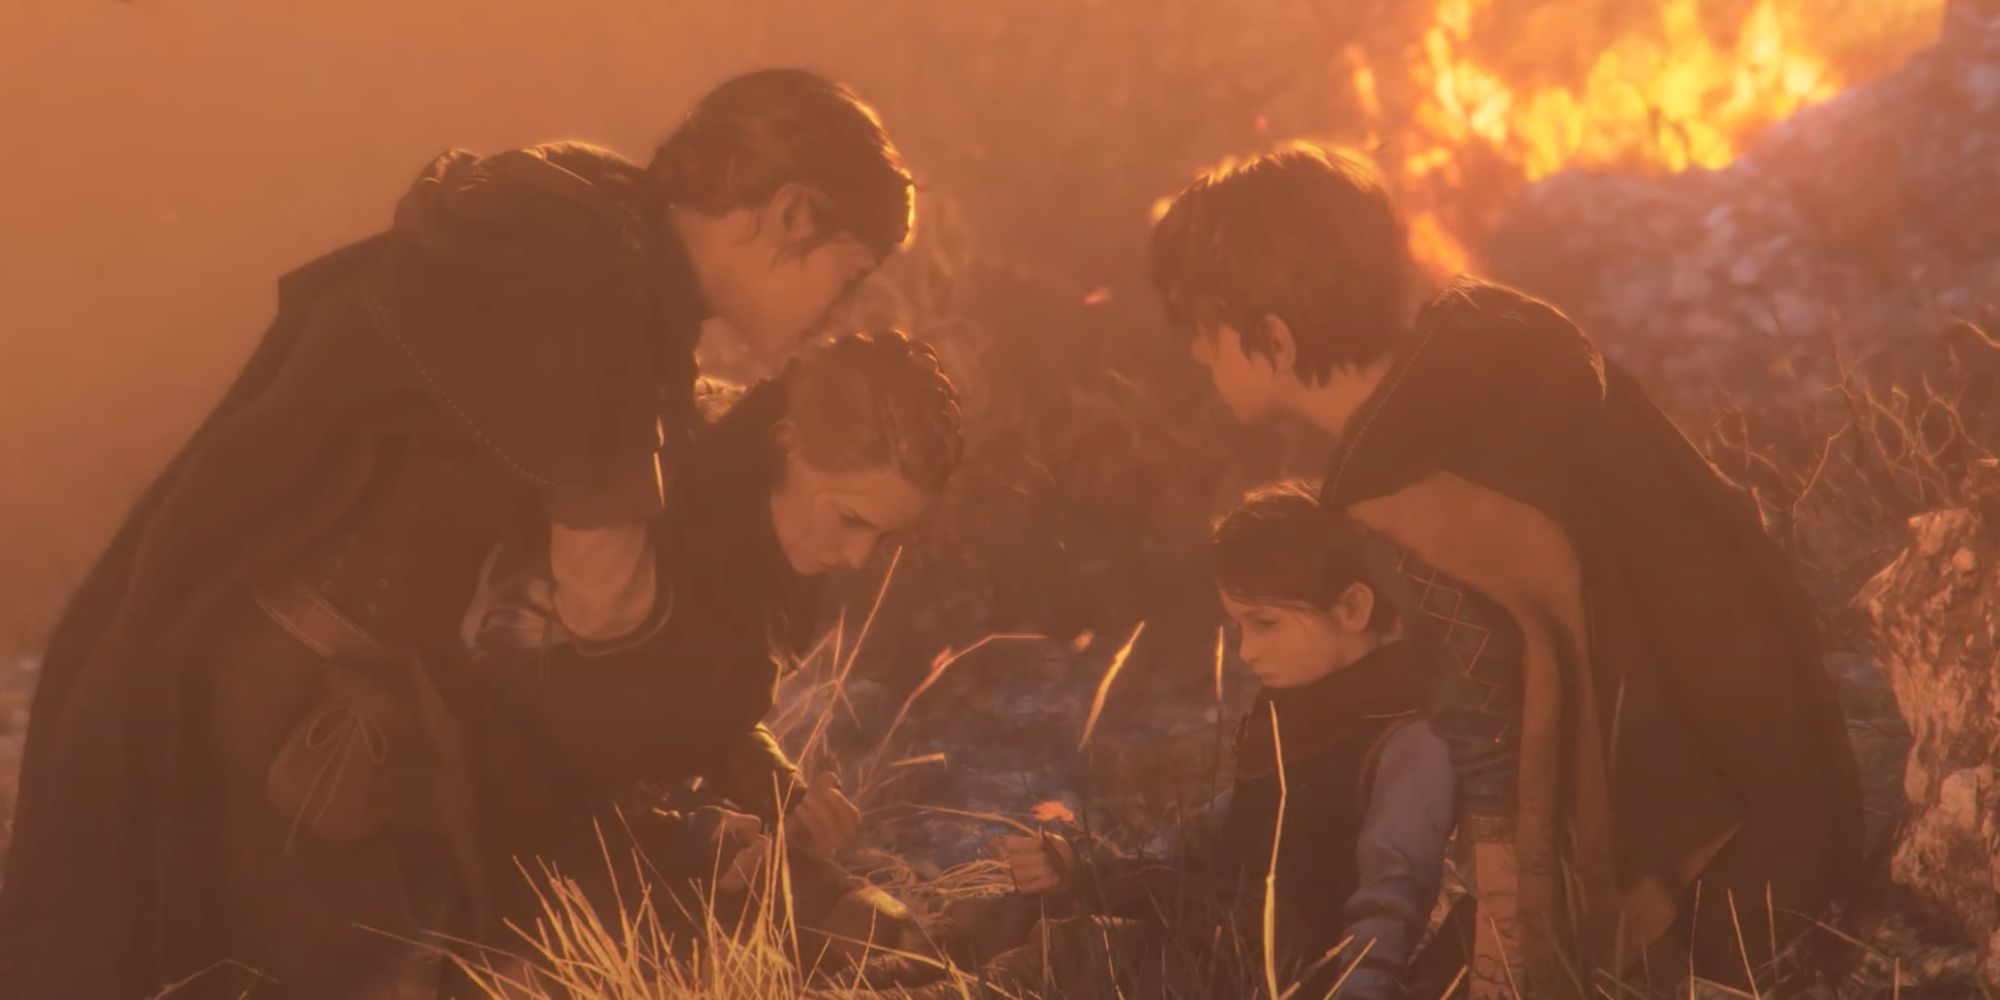 a plague tale requiem amicia hugo lucas beatrice in front of fire